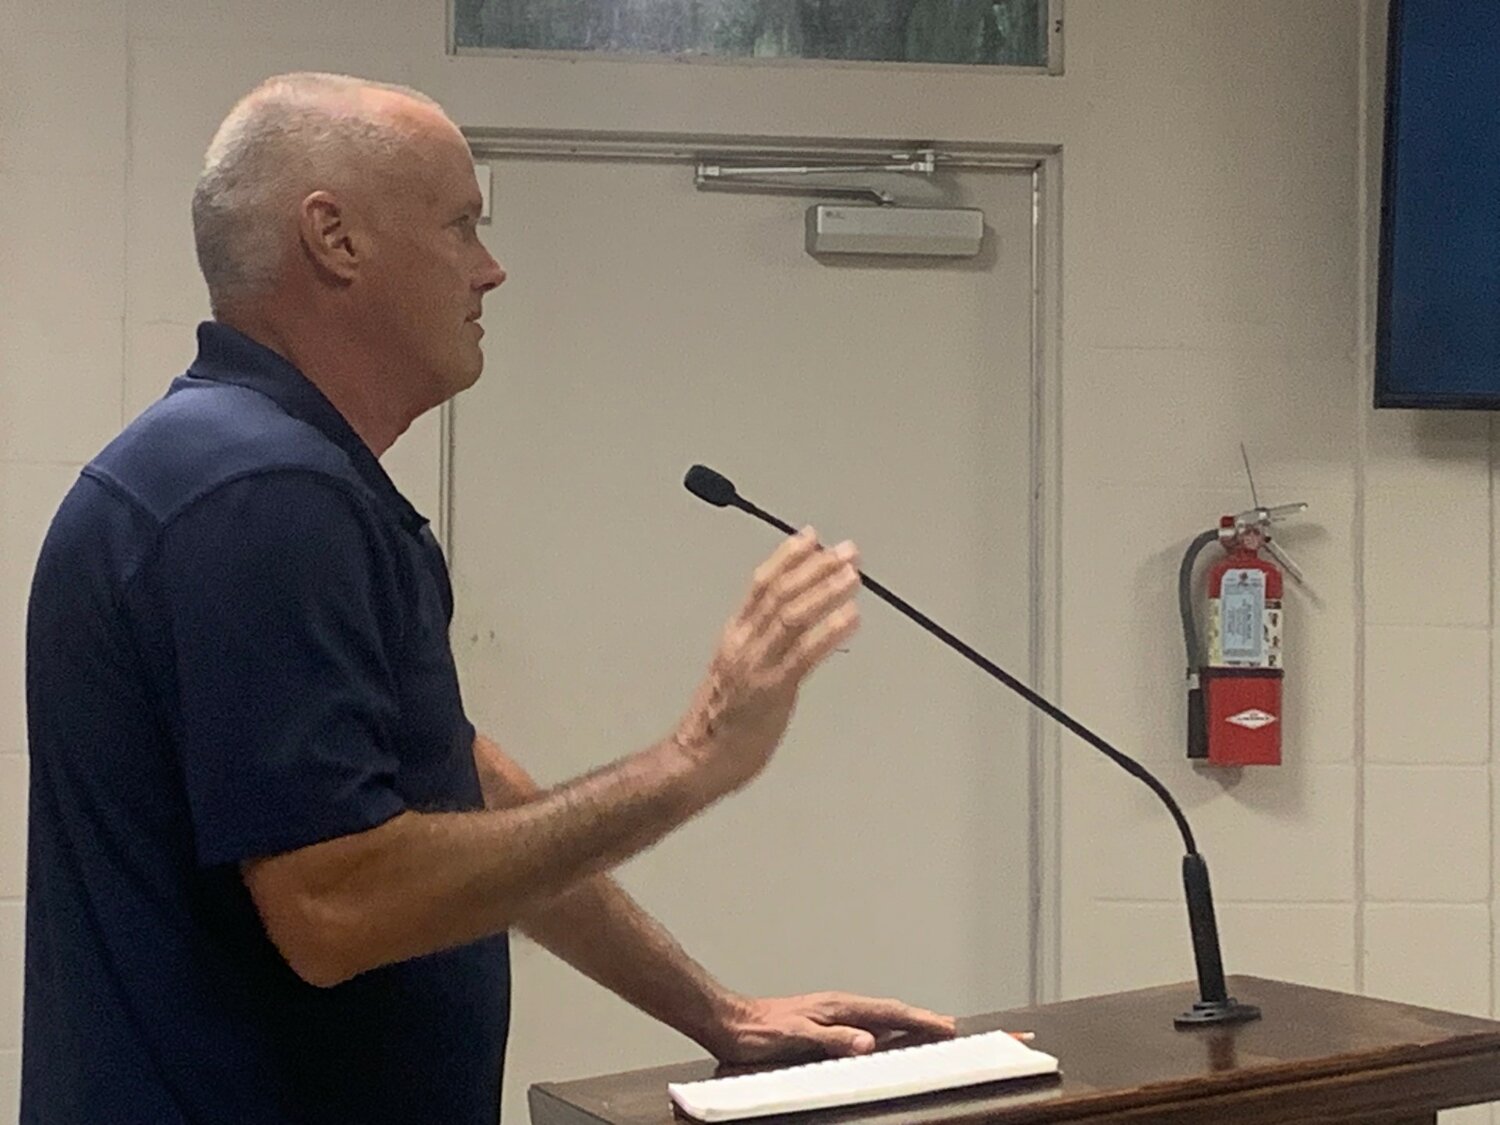 Keystone Heights resident David Nichols was one of 11 residents who opposed a plan to abolish the Keystone Heights Airport Authority and replace it was a manager hired by the city.